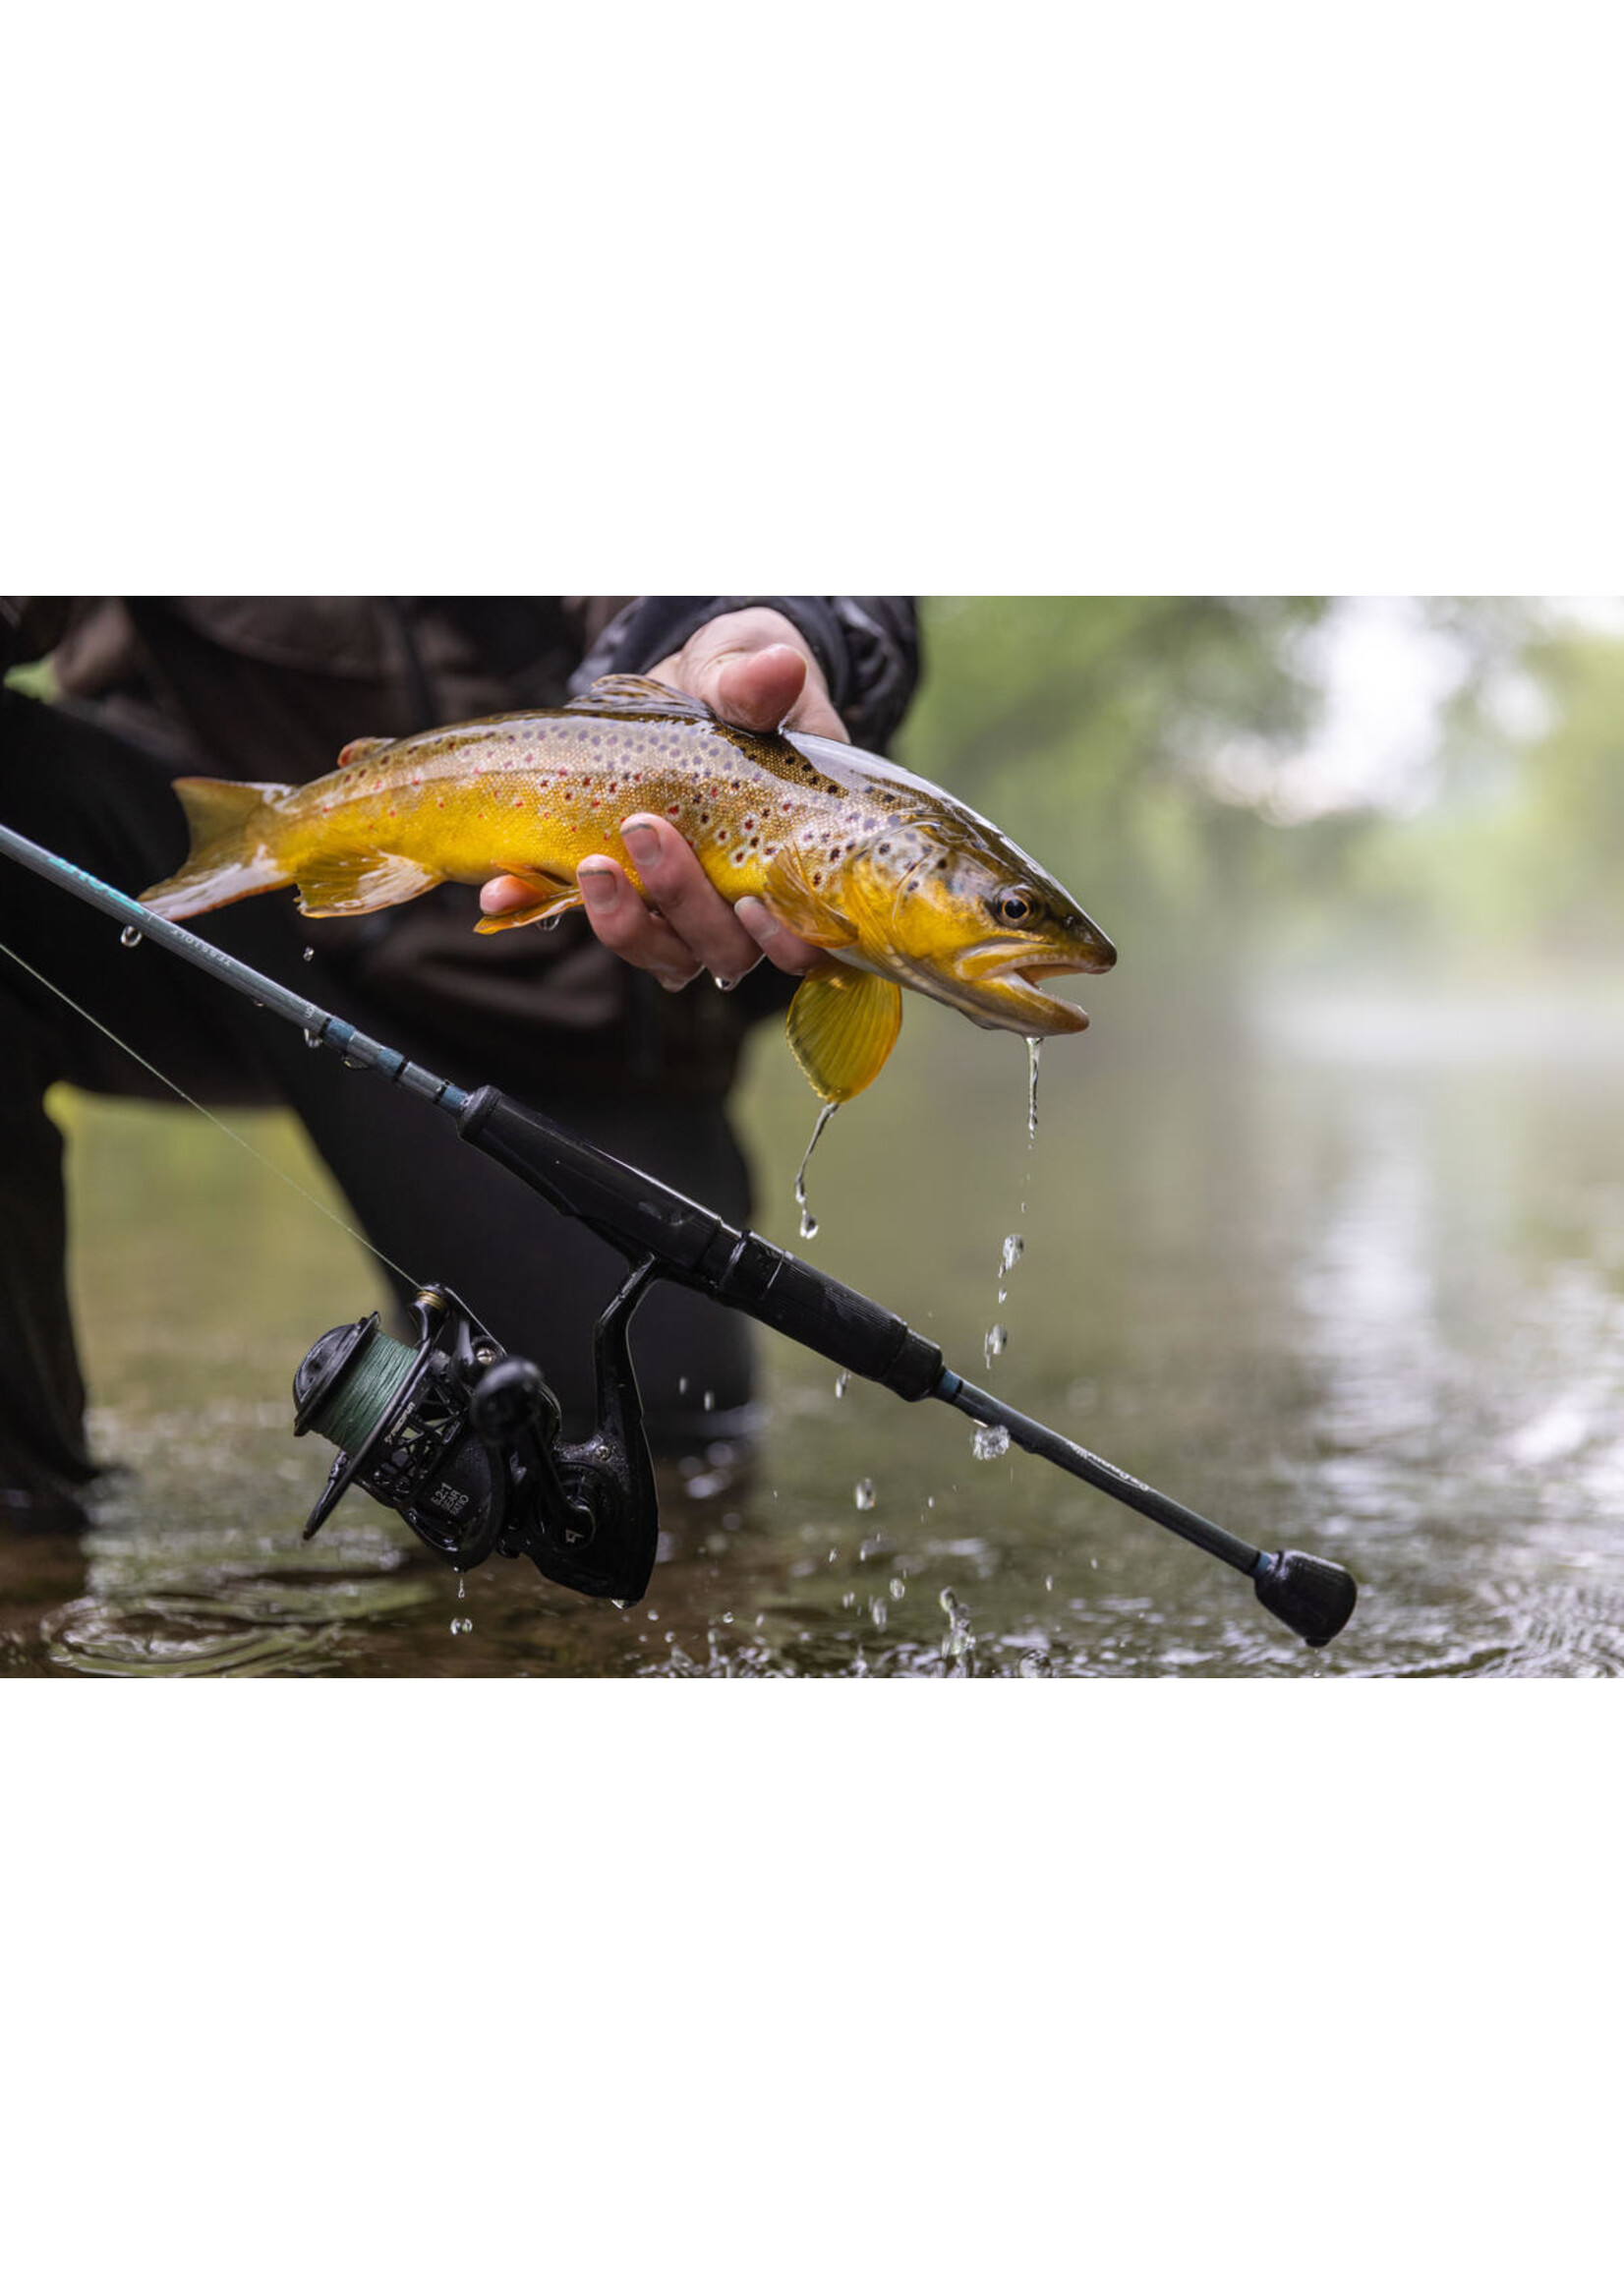 St. Croix Trout Series Spinning Rods - Tackle Shack